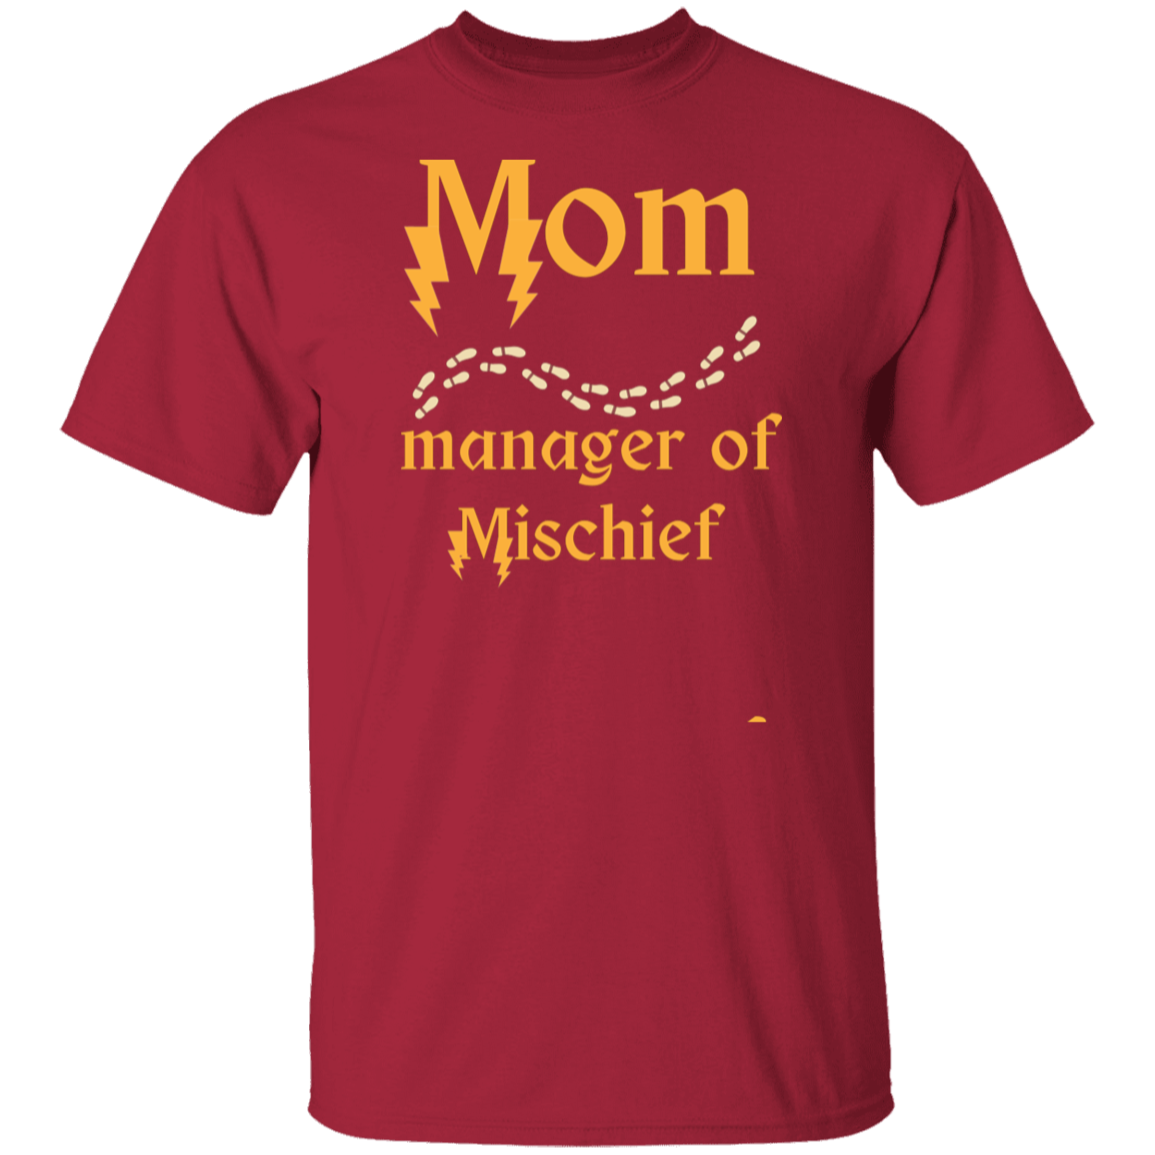 Mom Manager of Mischief  T-Shirt